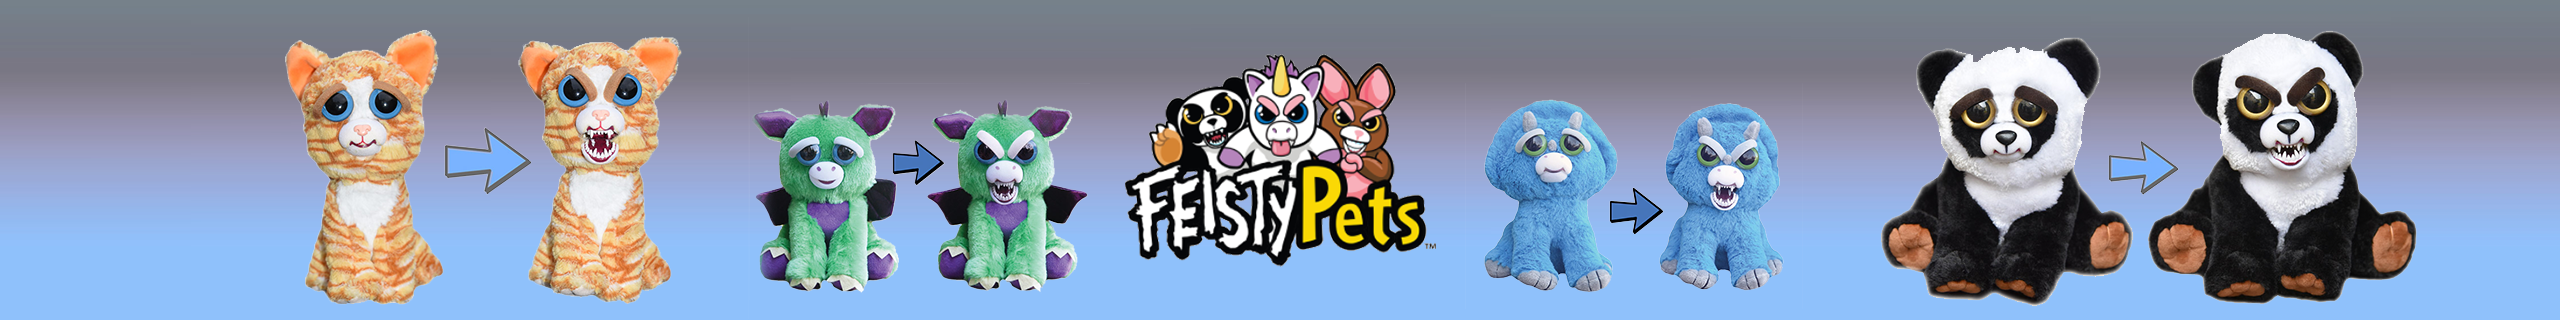 Feisty Pets | Toys